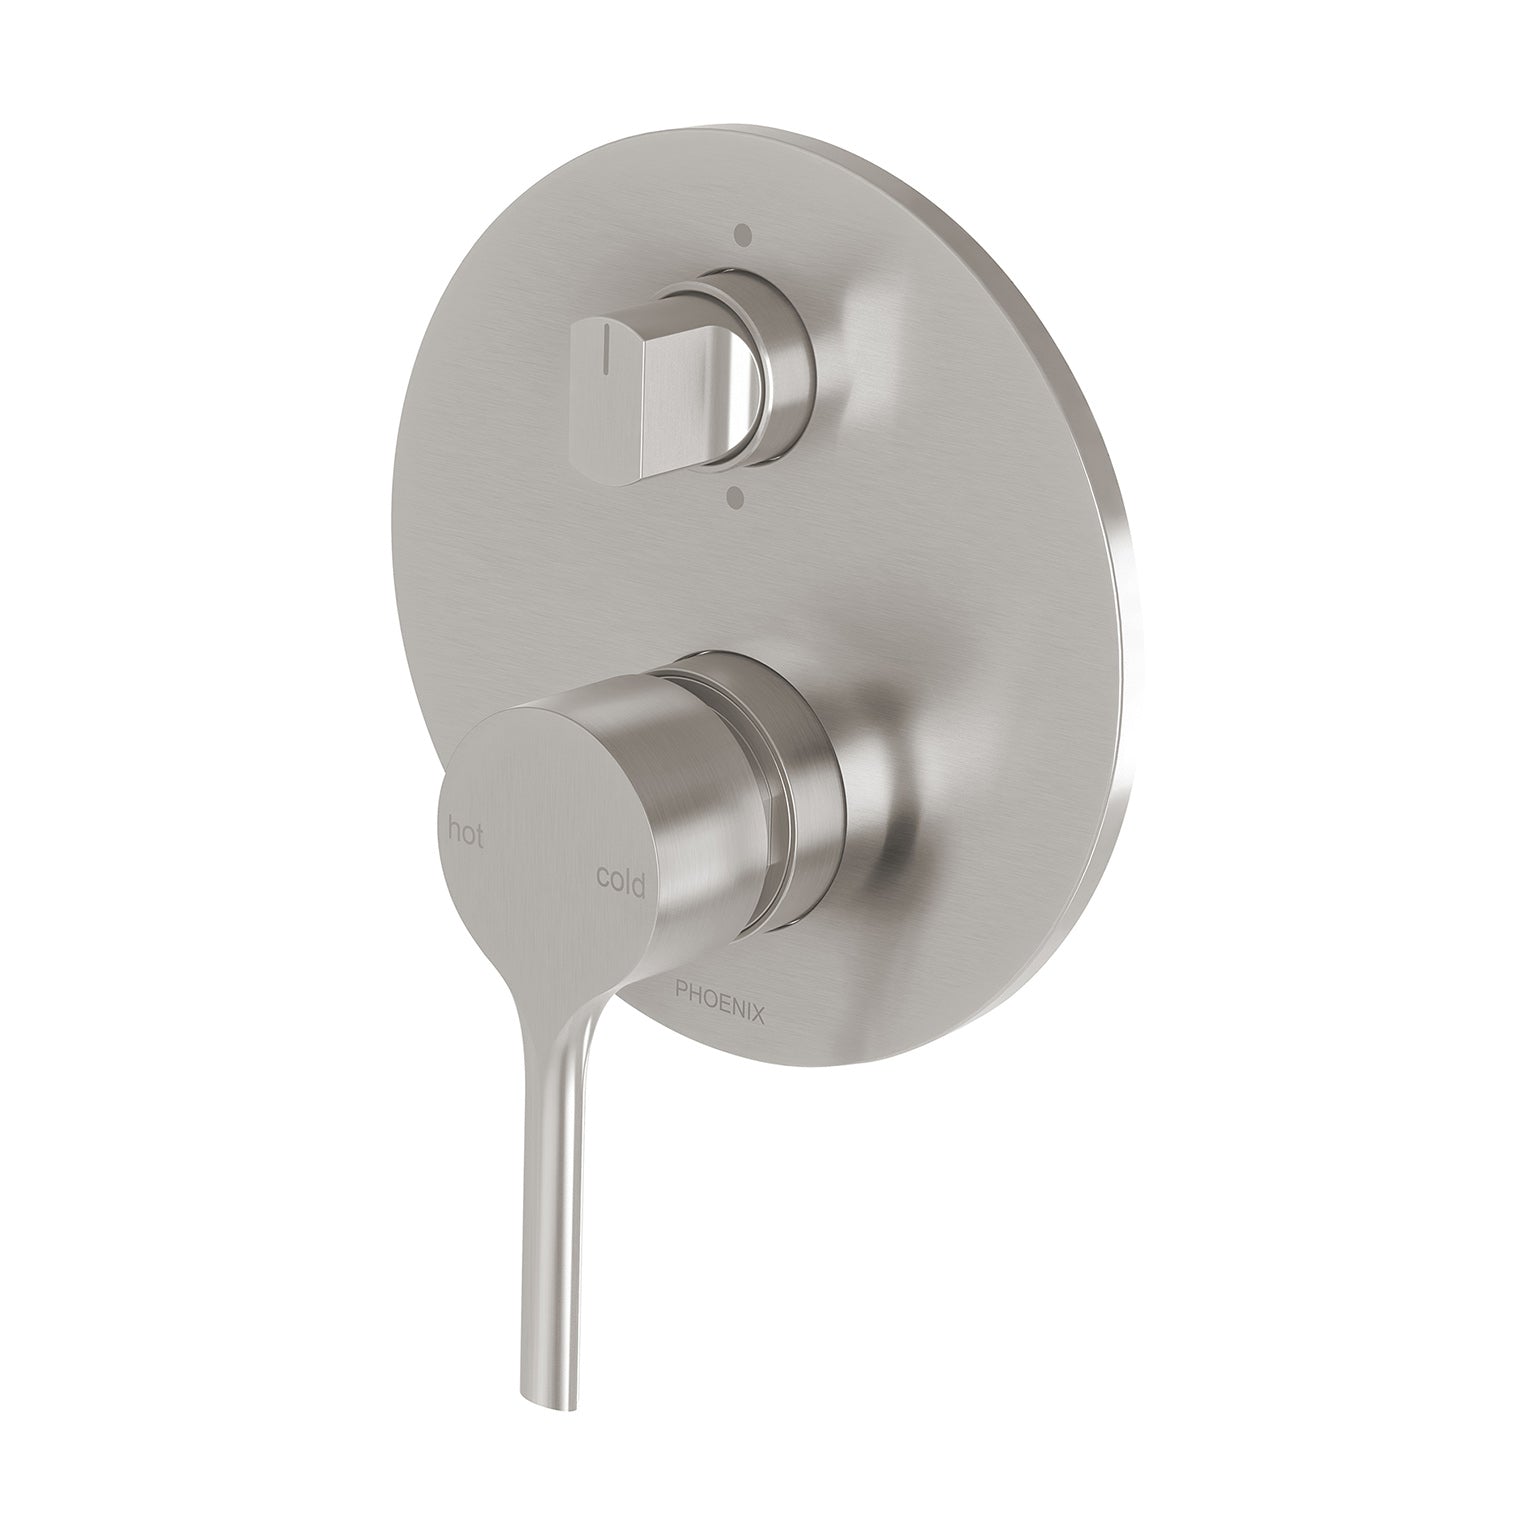 PHOENIX VIVID SLIMLINE OVAL SWITCHMIX SHOWER / BATH DIVERTER MIXER FIT-OFF AND ROUGH-IN KIT BRUSHED NICKEL